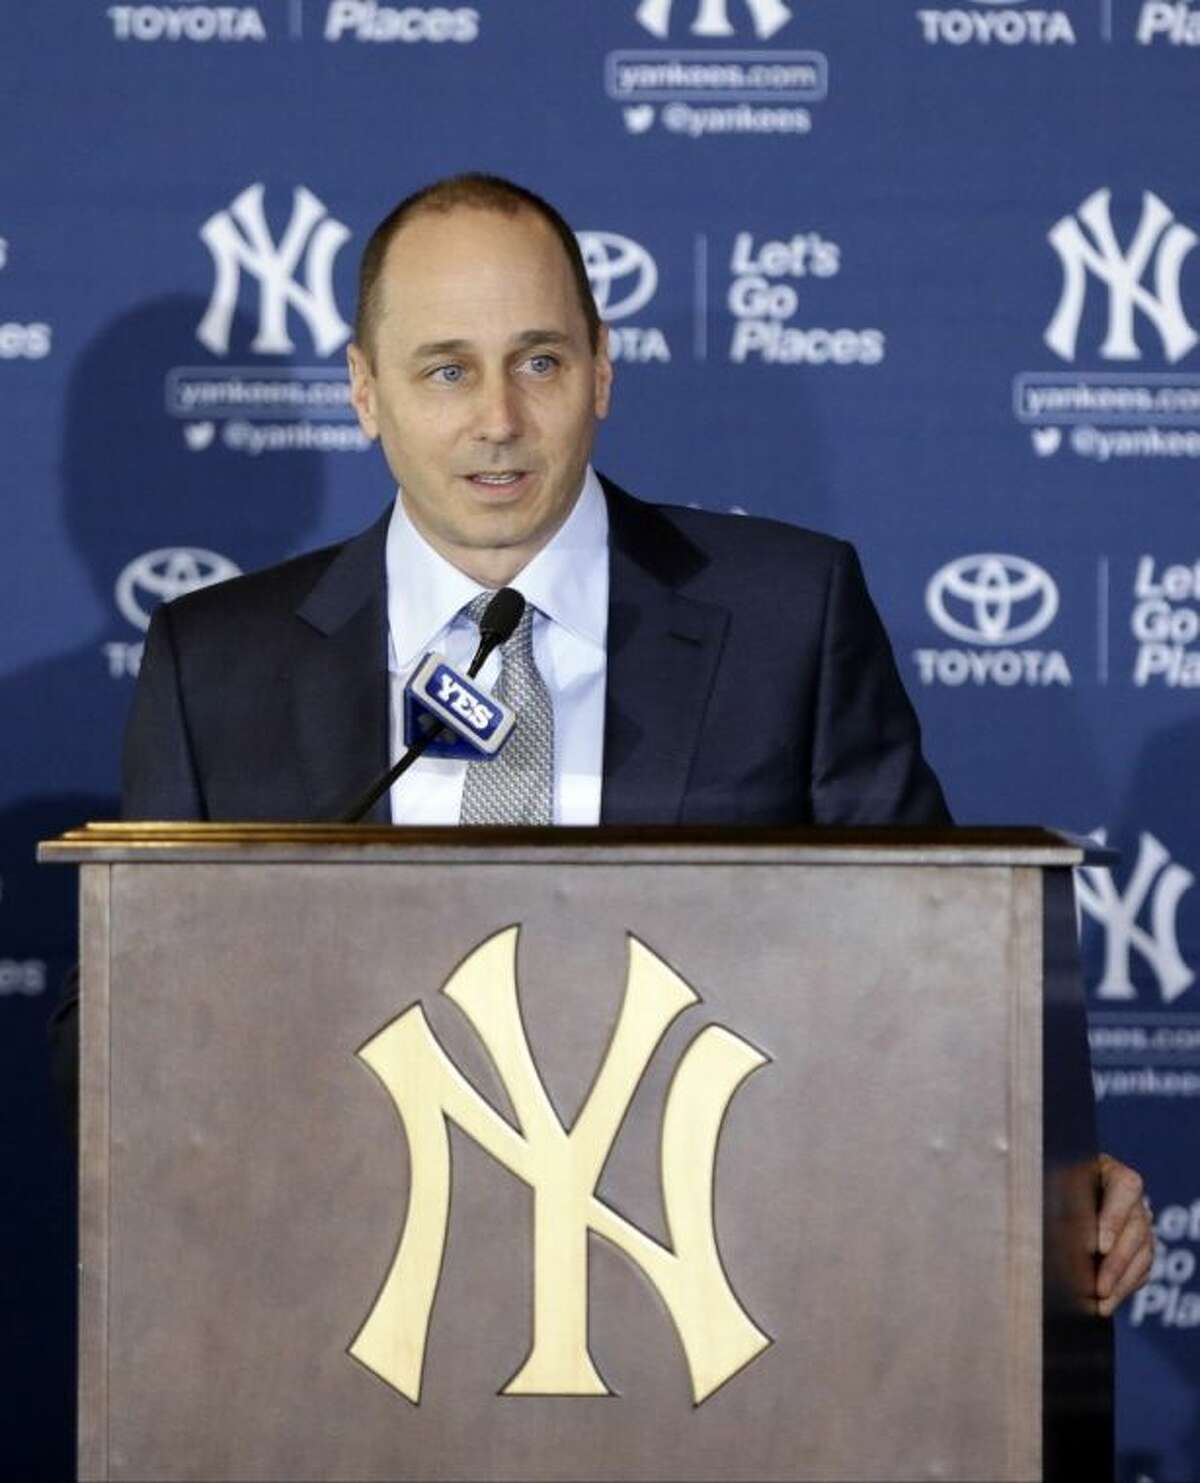 New York Yankees general manager Brian Cashman speaks during a news conference, where Masahiro Tanaka of Japan was introduced as a new pitcher for the team, at Yankee Stadium Tuesday, Feb. 11, 2014, in New York. (AP Photo/Frank Franklin II)